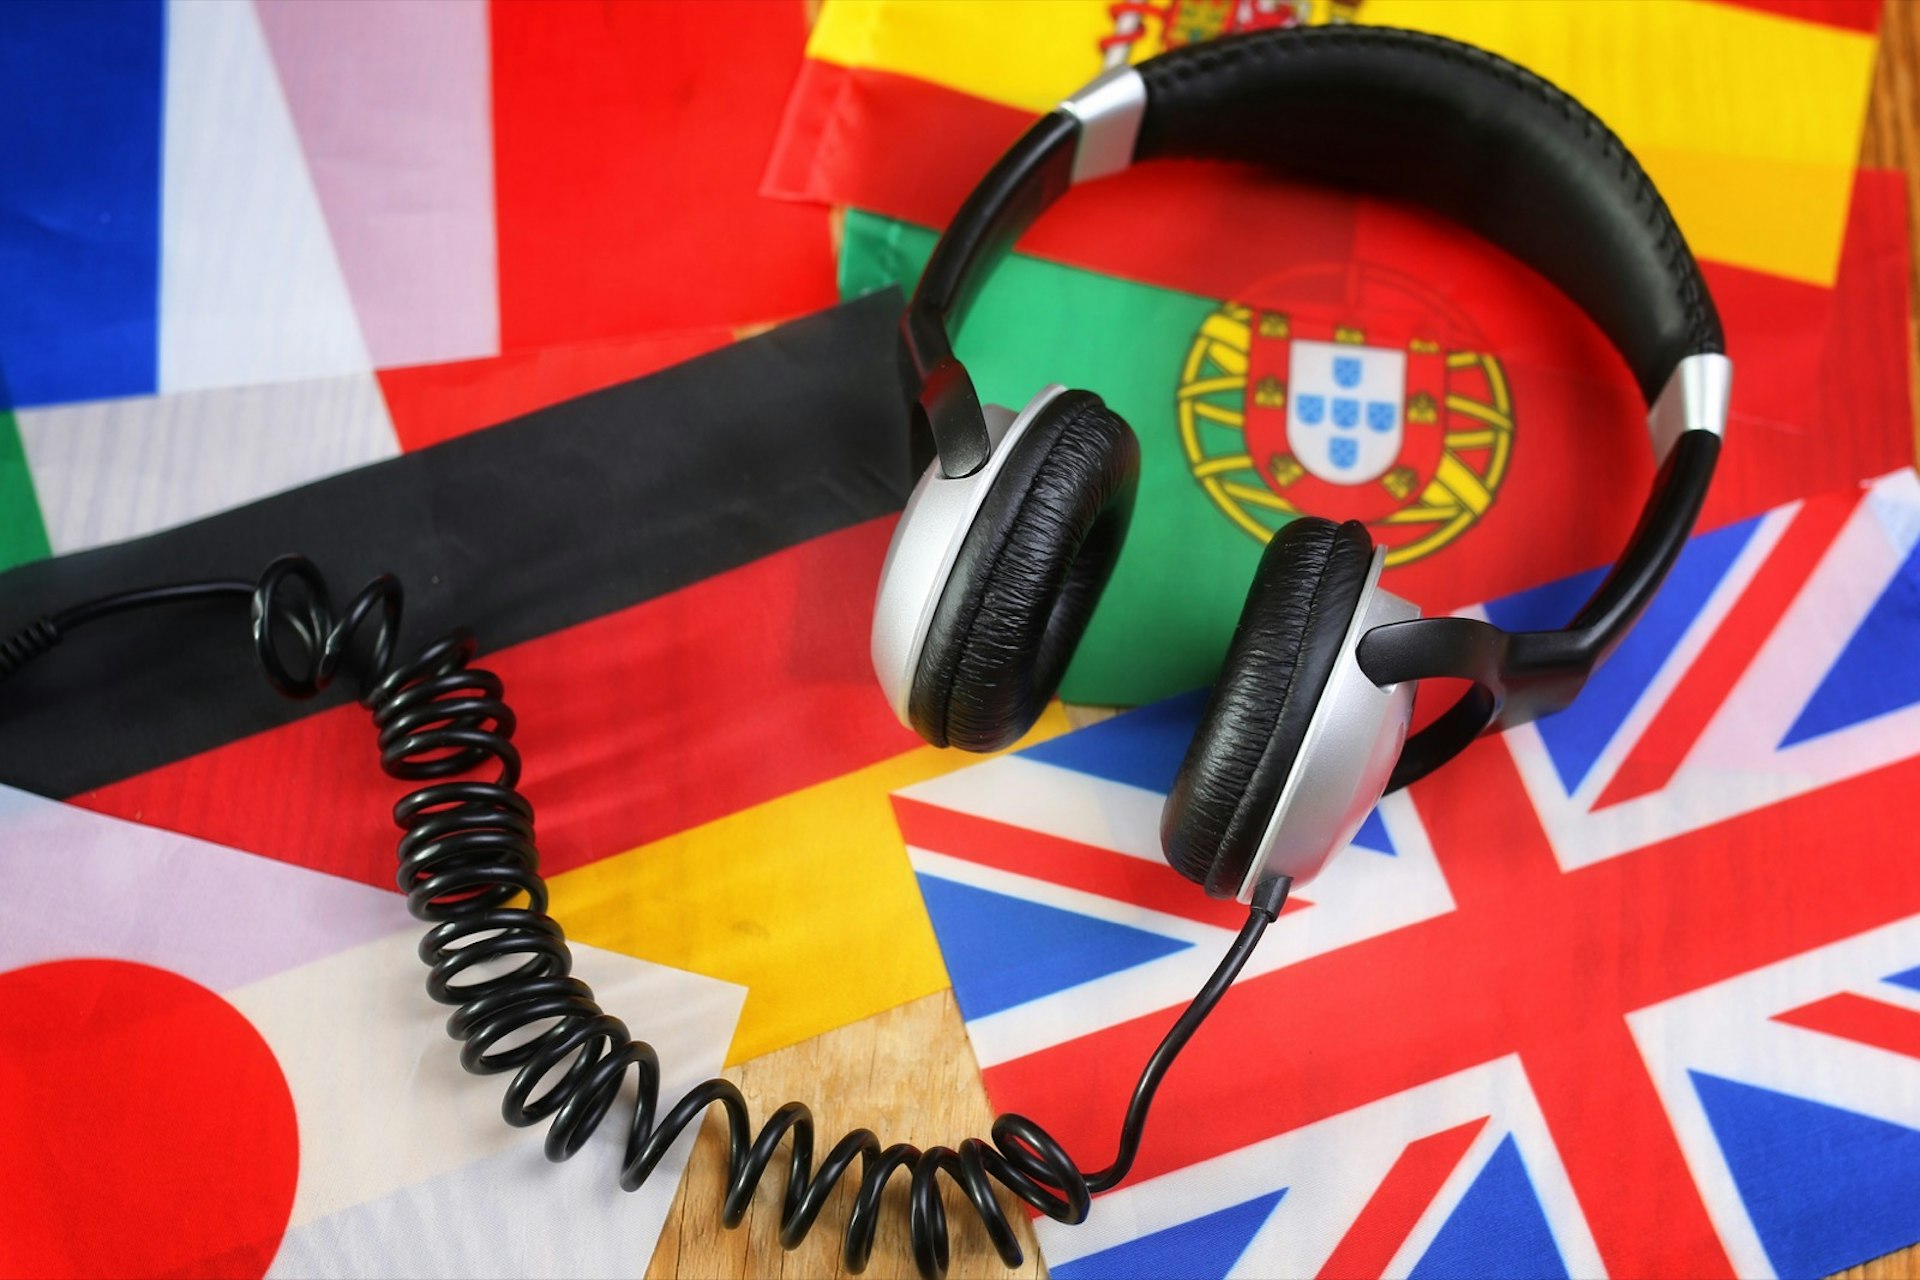 A set of silver and black headphones with a twisty cord sitting on a selection of flags on a wooden table. The flags include Japan, Great Britain, France, Italy, Germany, Portugal and Spain. 